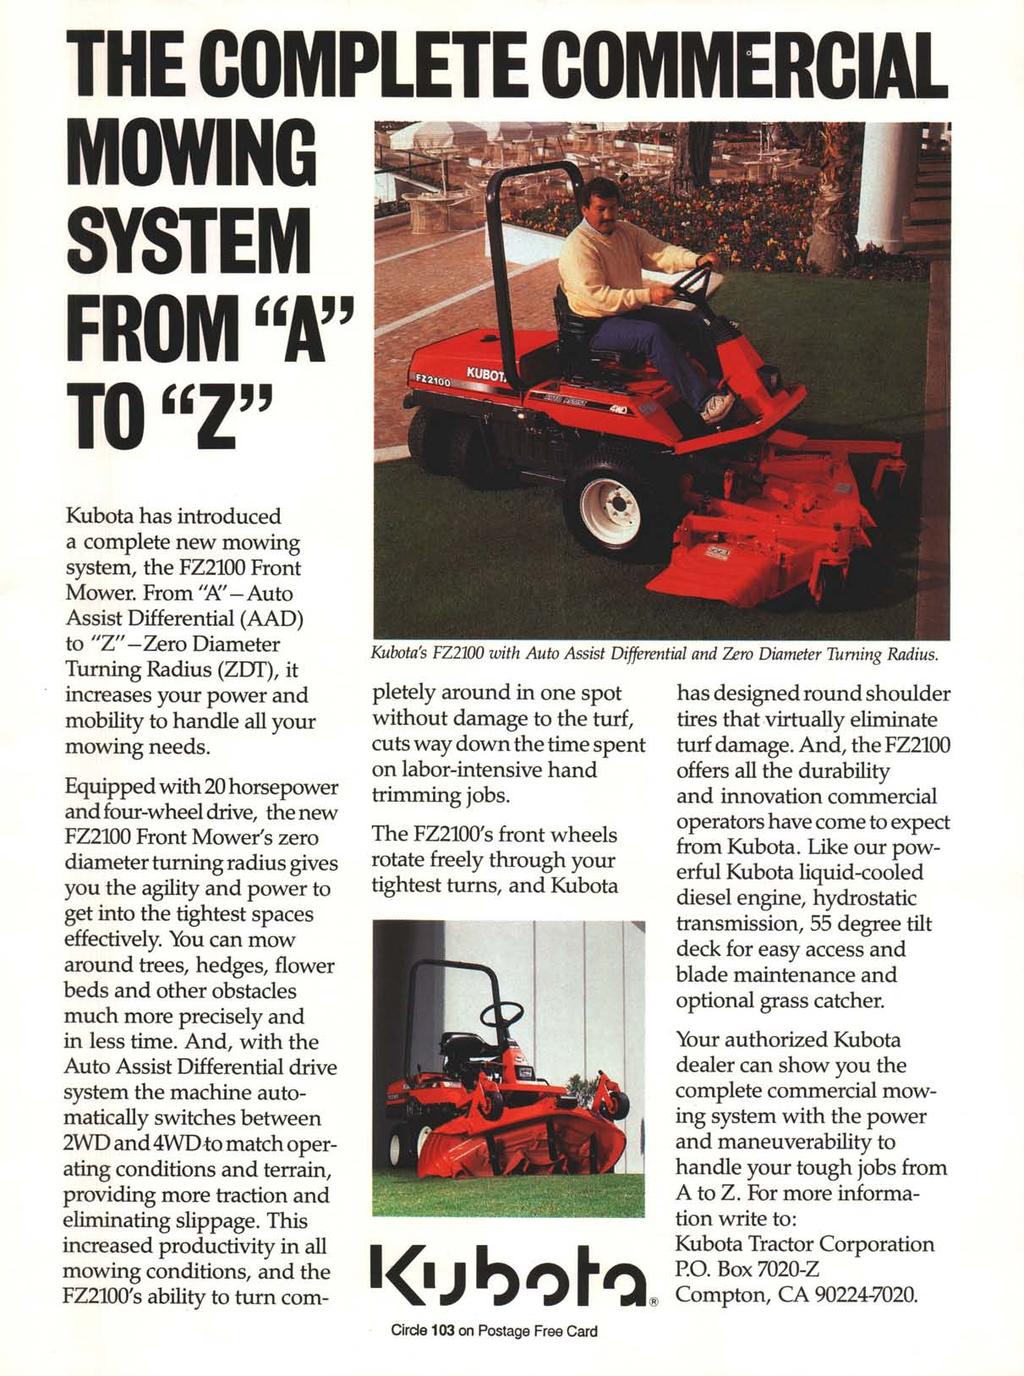 THE COMPLETE COMMERCIAL MOWING SYSTEM FROM "fi' TO "Z" Kubota has introduced a complete new mowing system, the FZ2100 Front Mower.